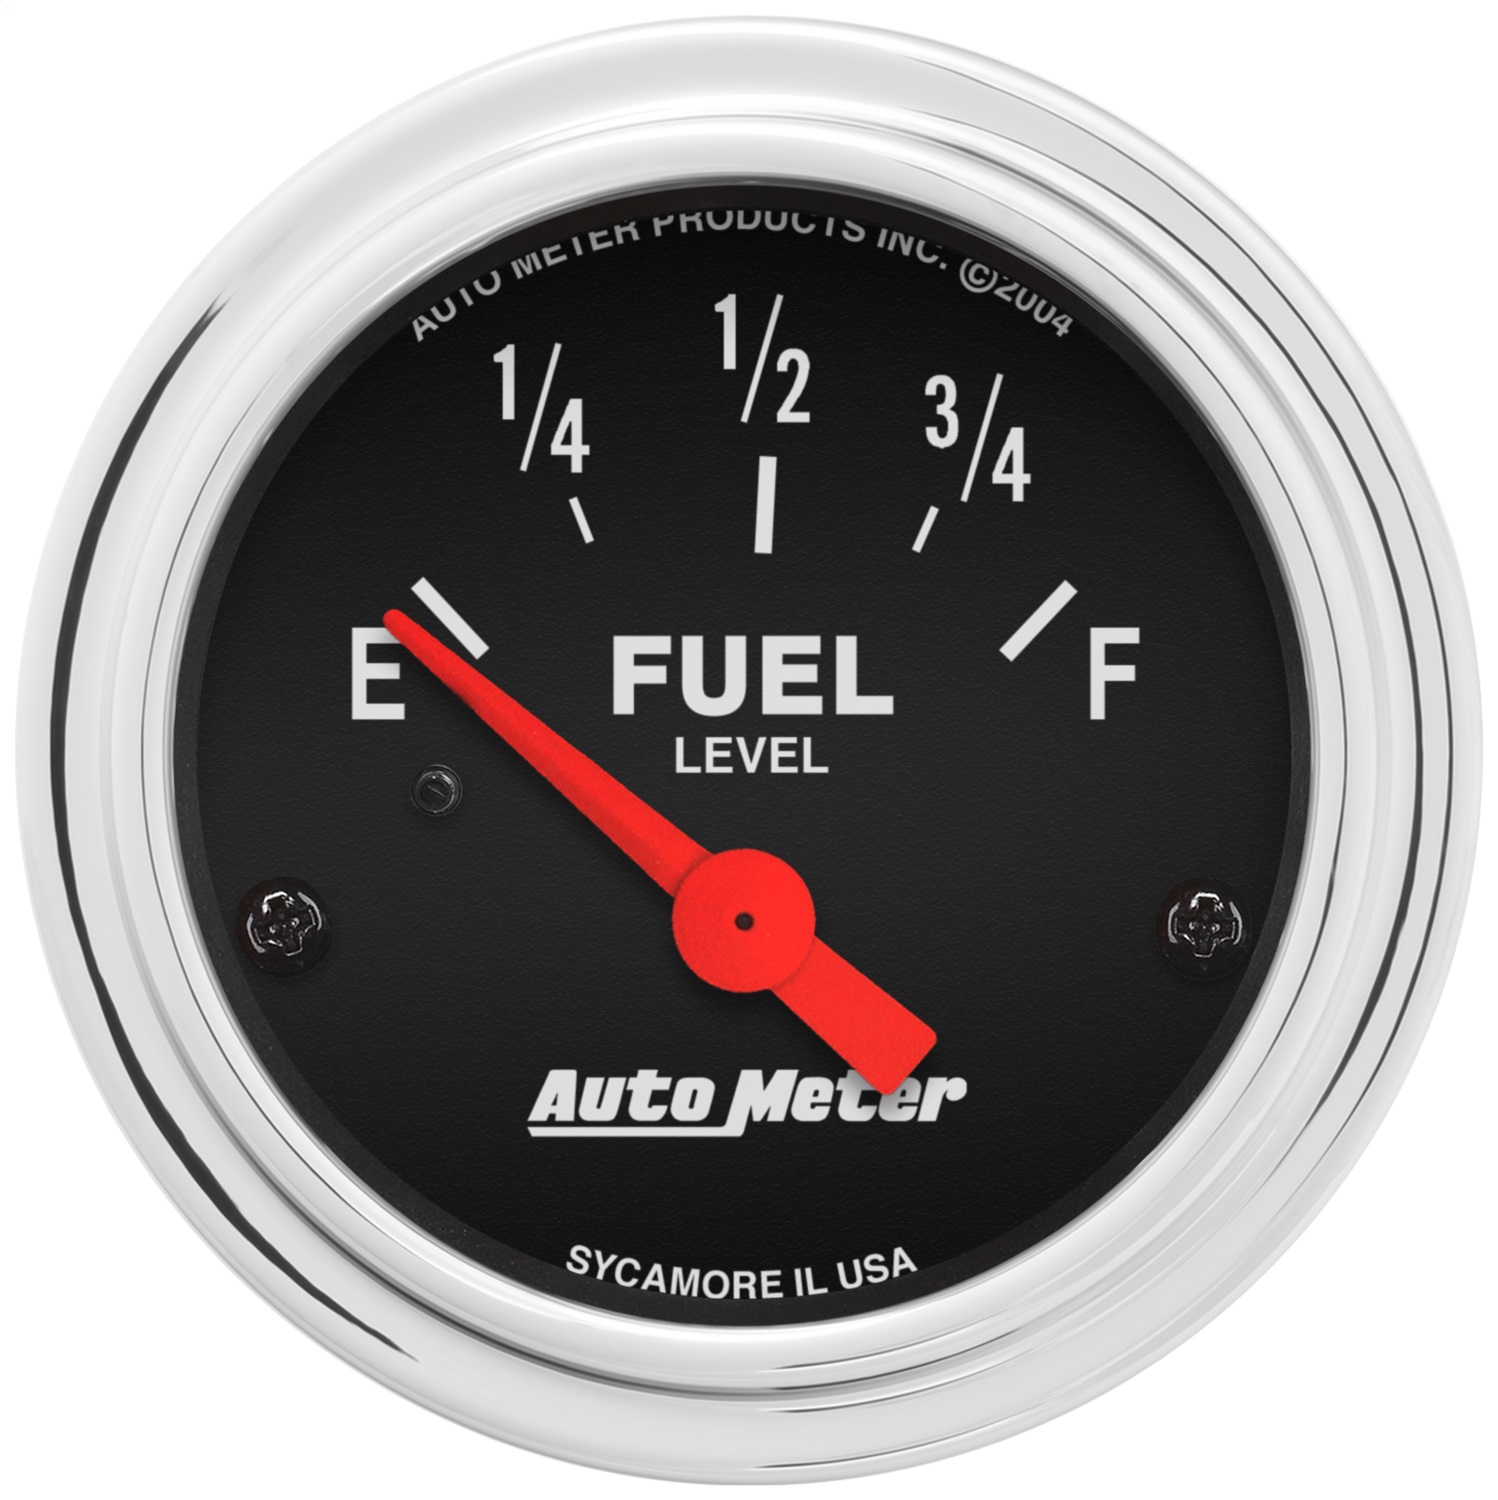 Auto Meter Auto Meter 2514 Traditional Chrome Electric Fuel Level Gauge